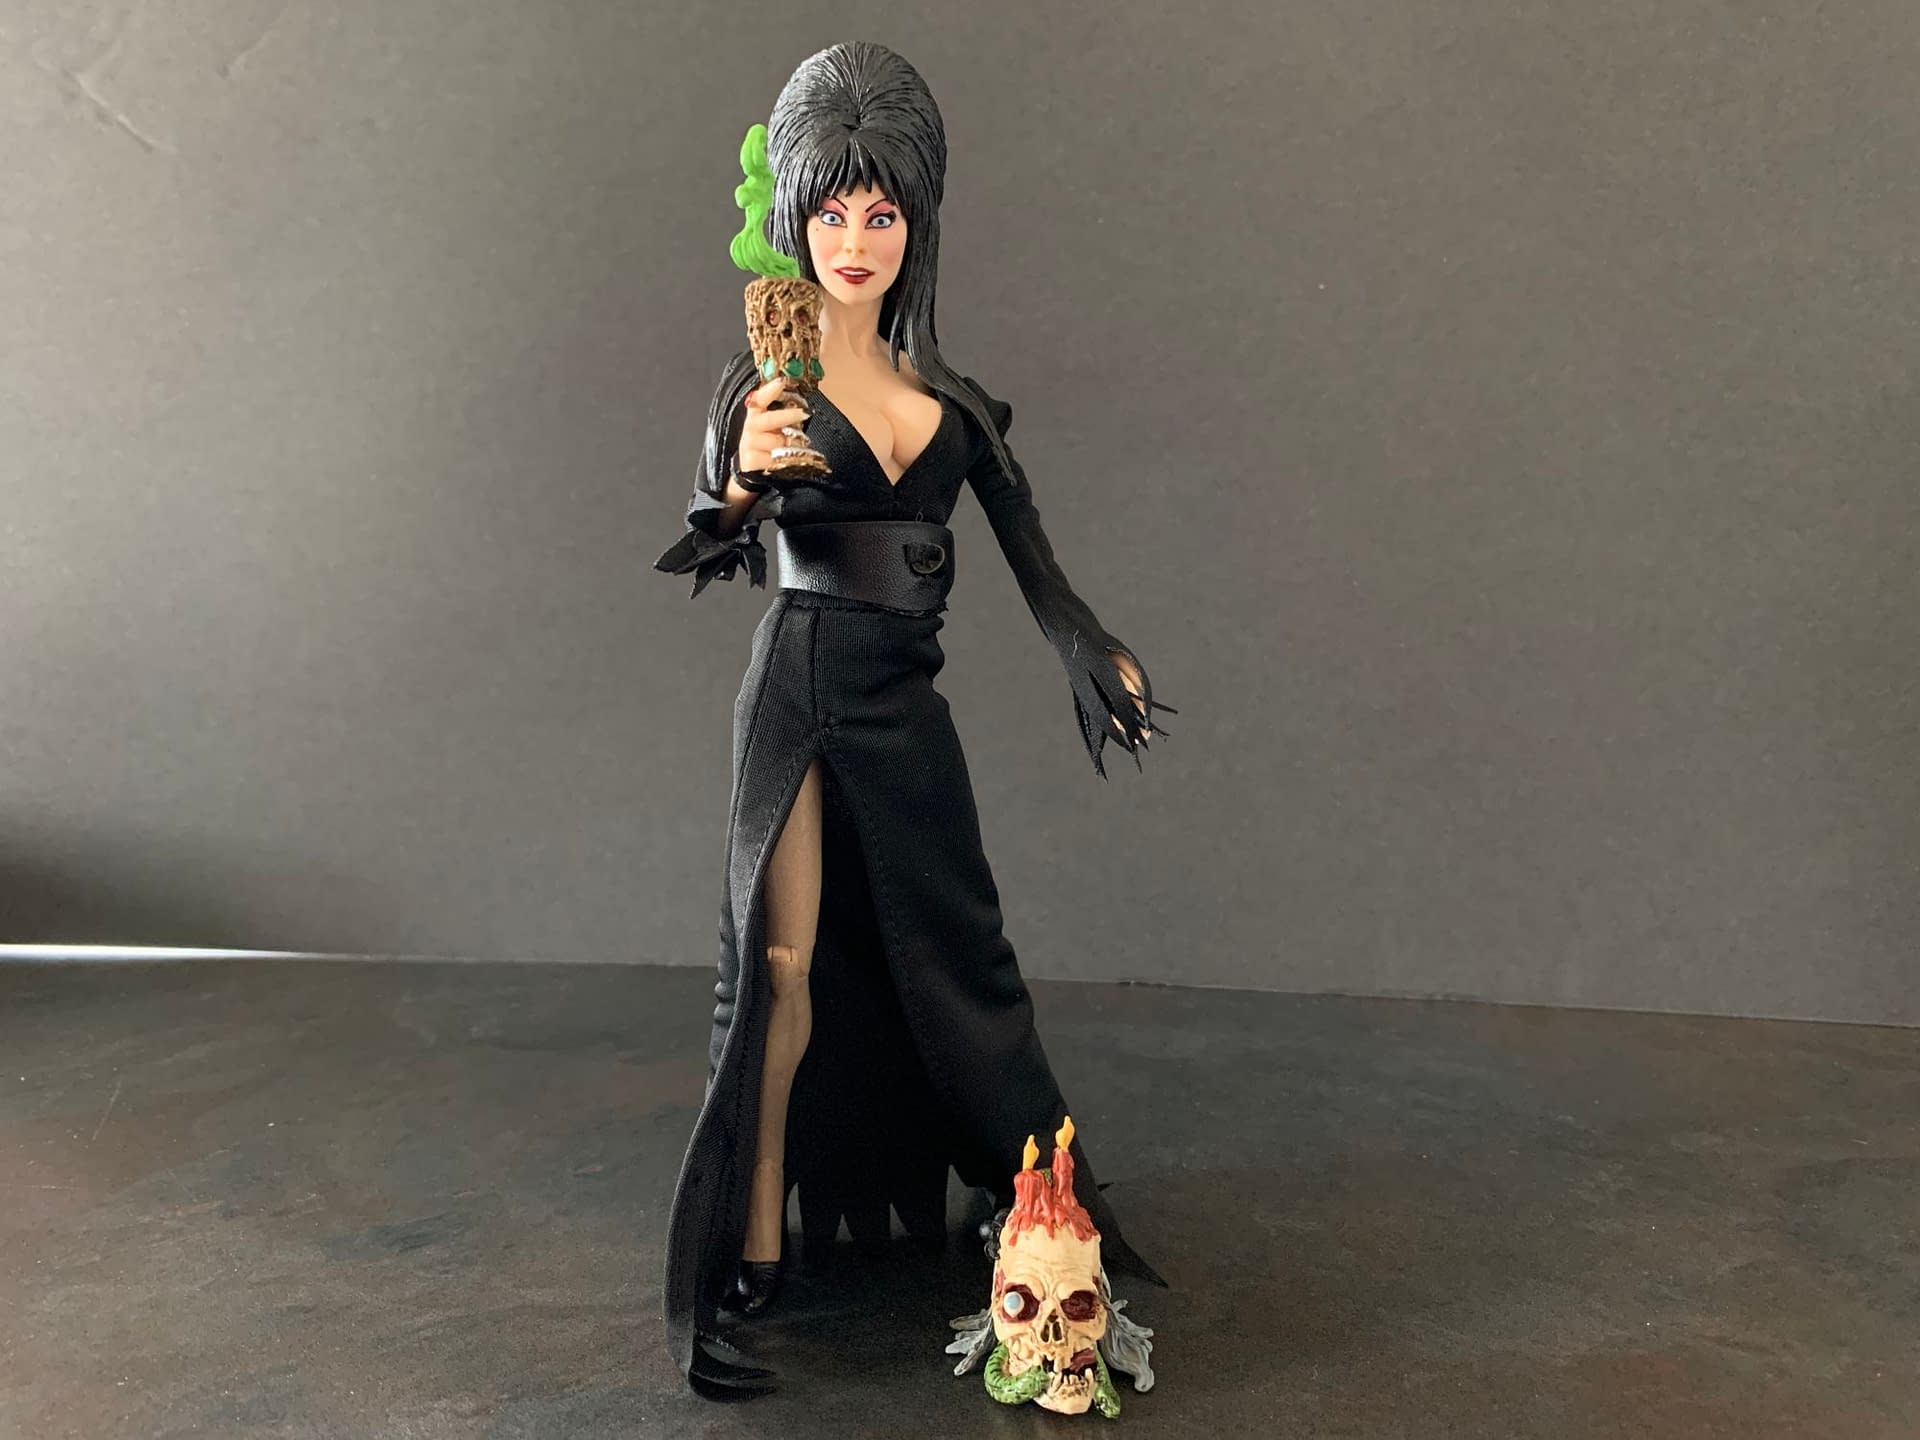 Elvira Gets The Tribute She Deserves With New NECA Figure